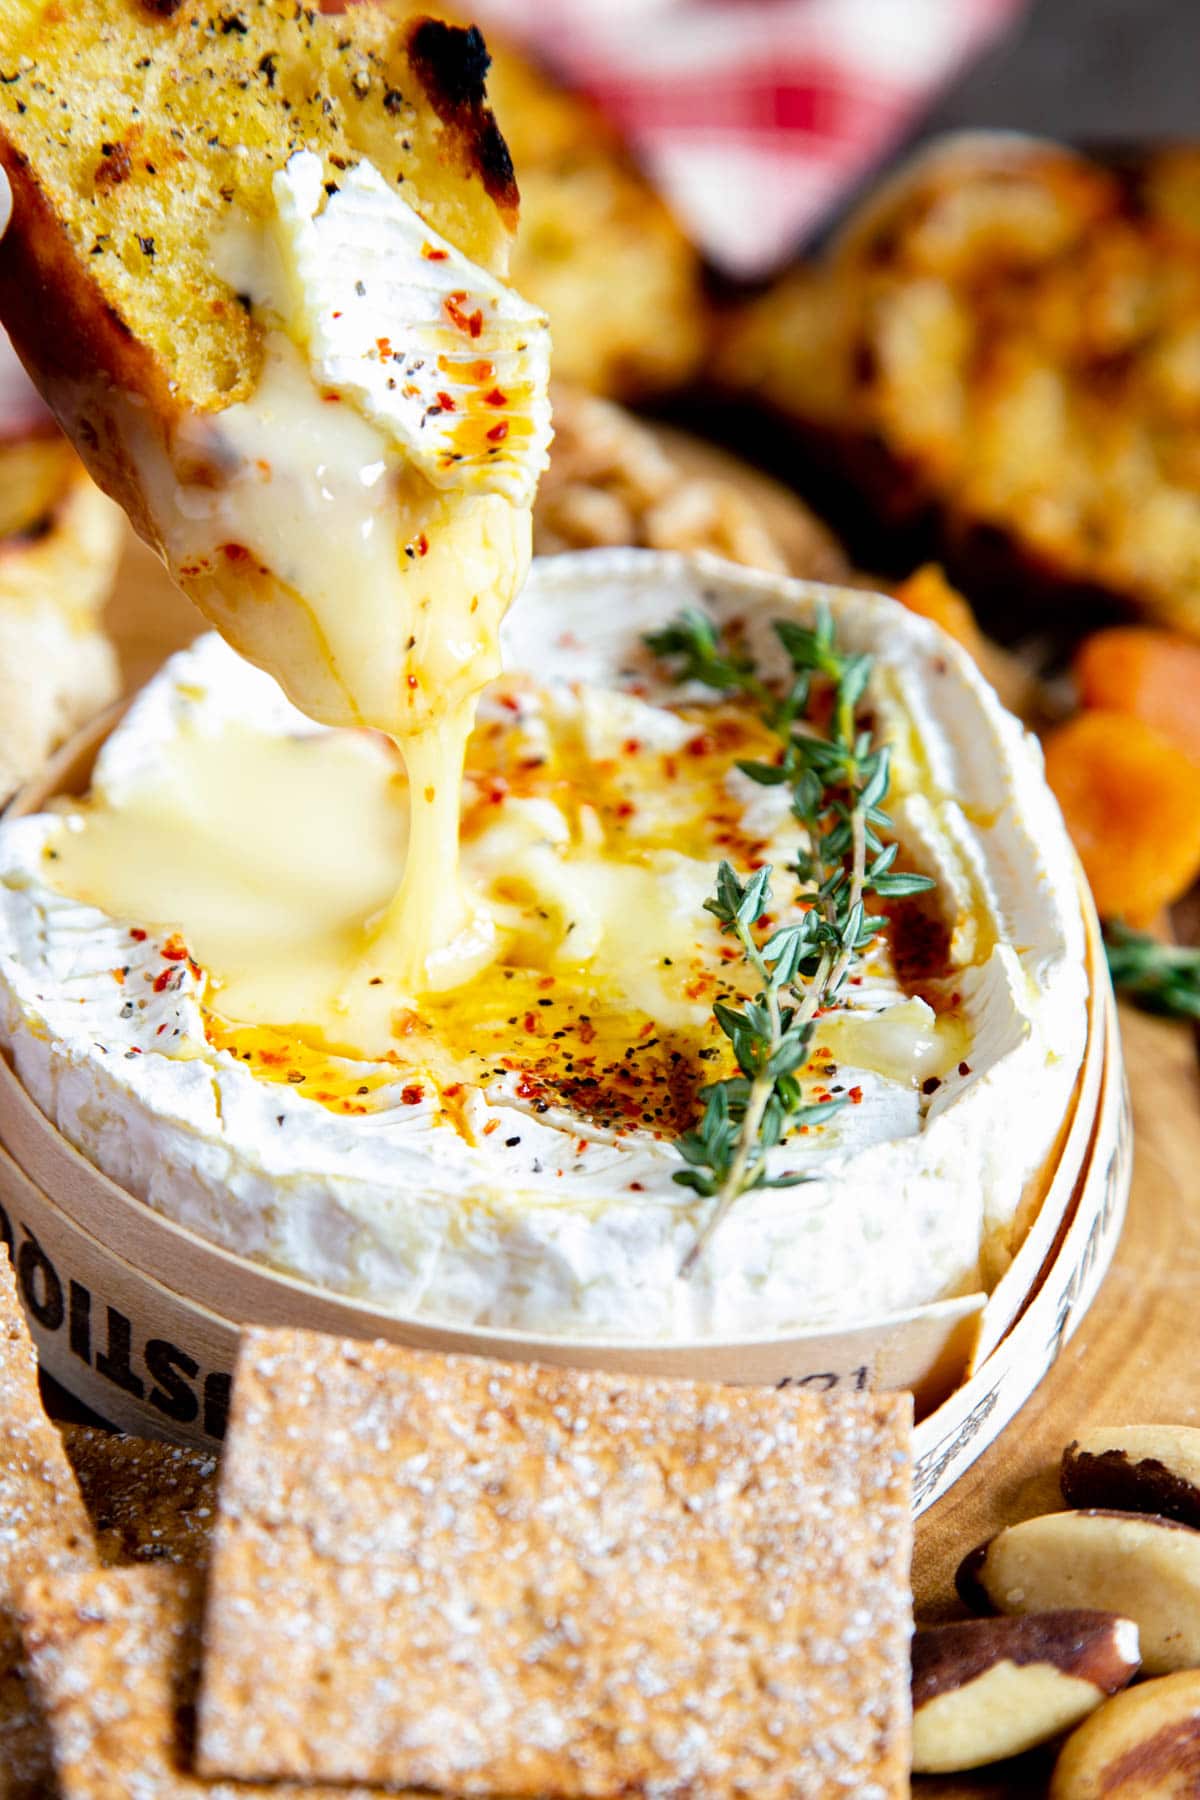 formaat matchmaker Afgekeurd Best Ever Baked Camembert - Perfect Melted Cheese - FussFreeFlavours